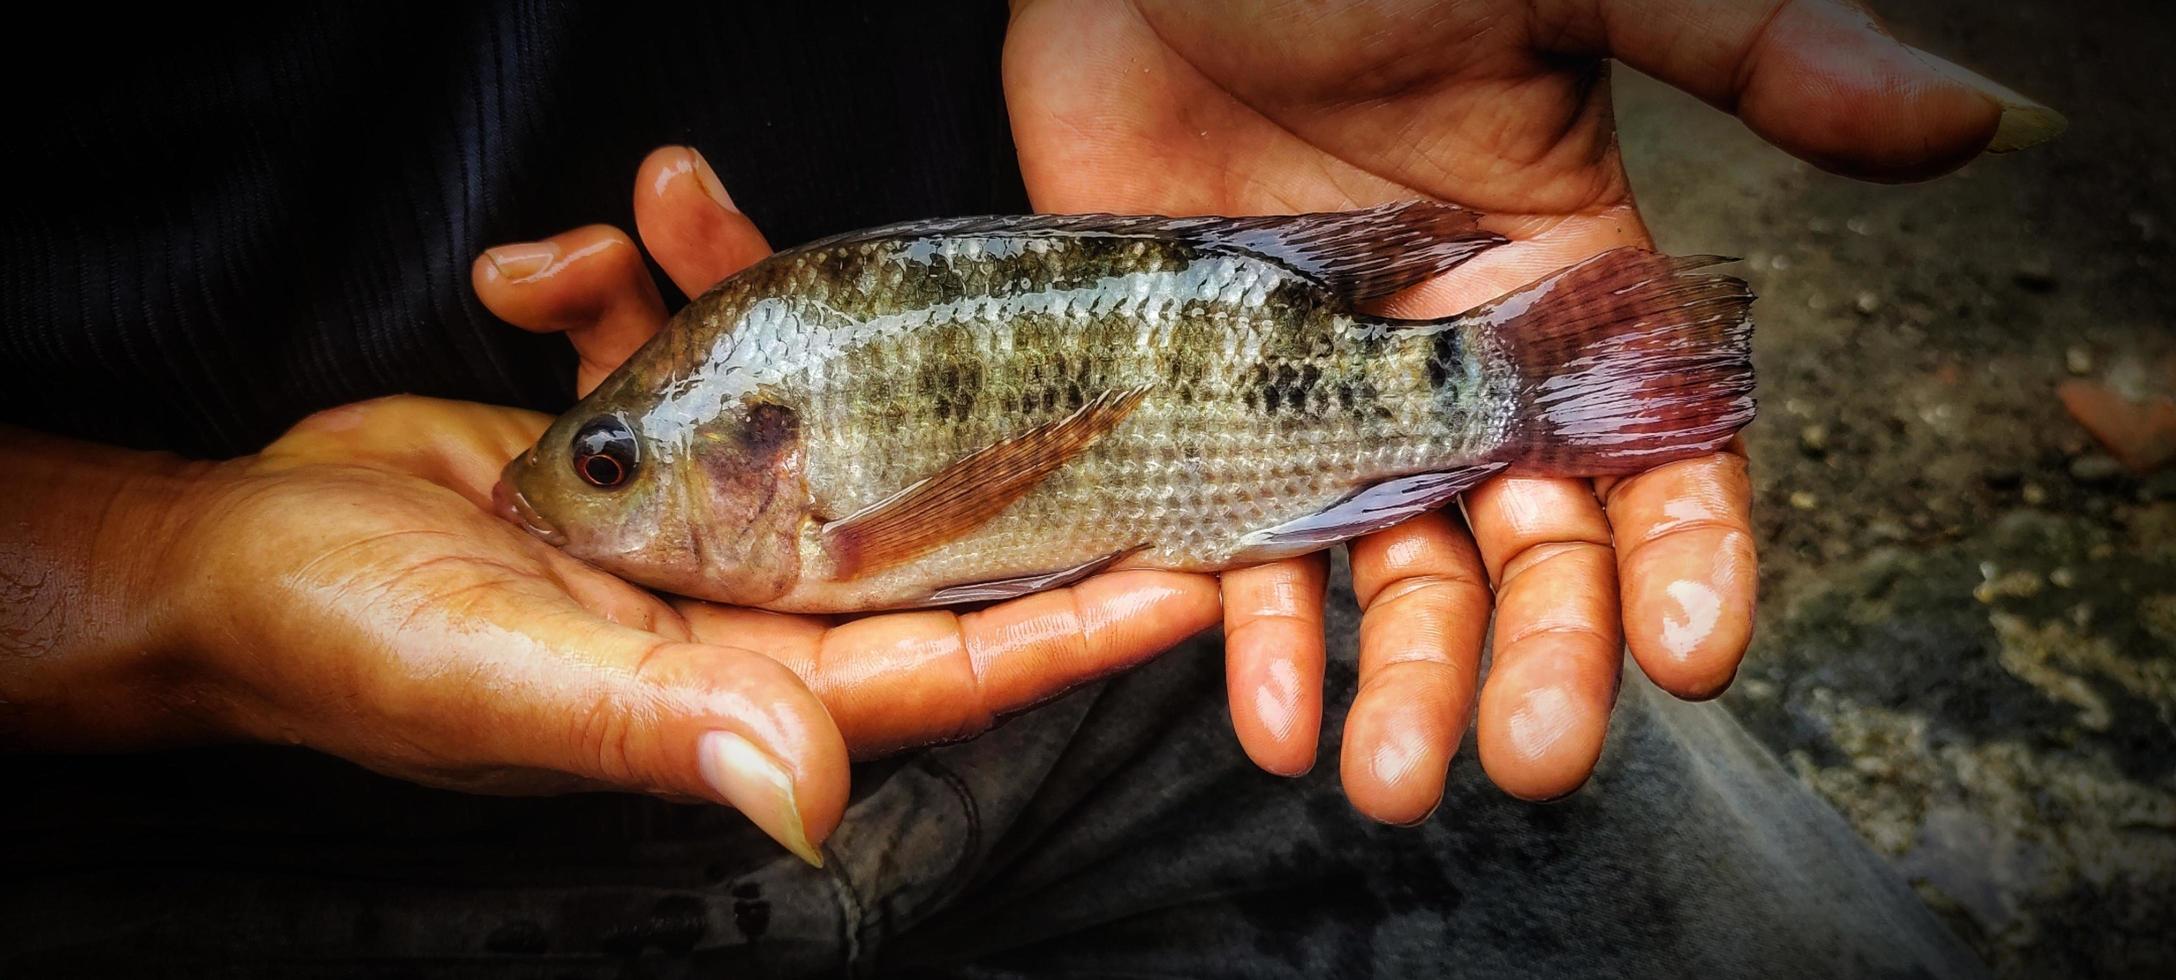 Man Holding Oreochromis mossambicus fish, tilapia or mujair fish. Fresh Oreochromis mossambicus is quite large in size ready to be marketed photo